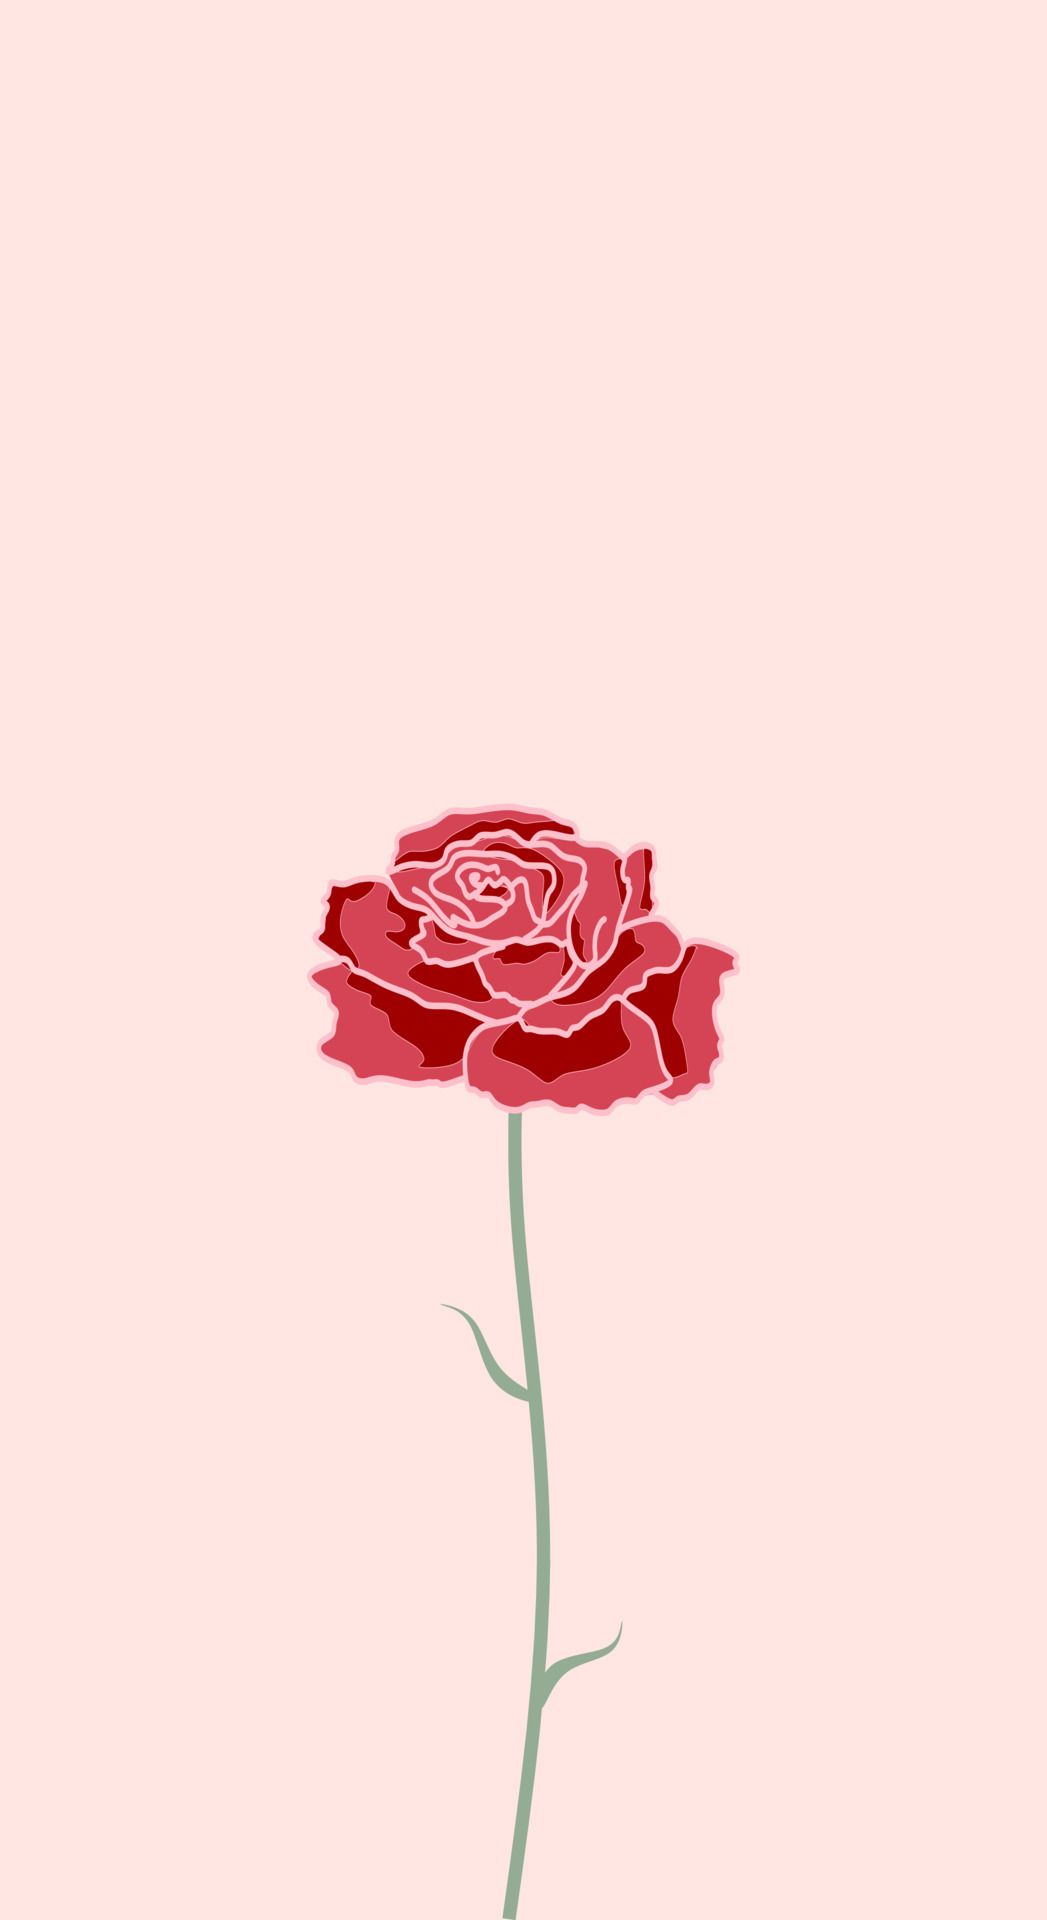 IPhone wallpaper with a red rose on a pink background - Garden, nature, plants